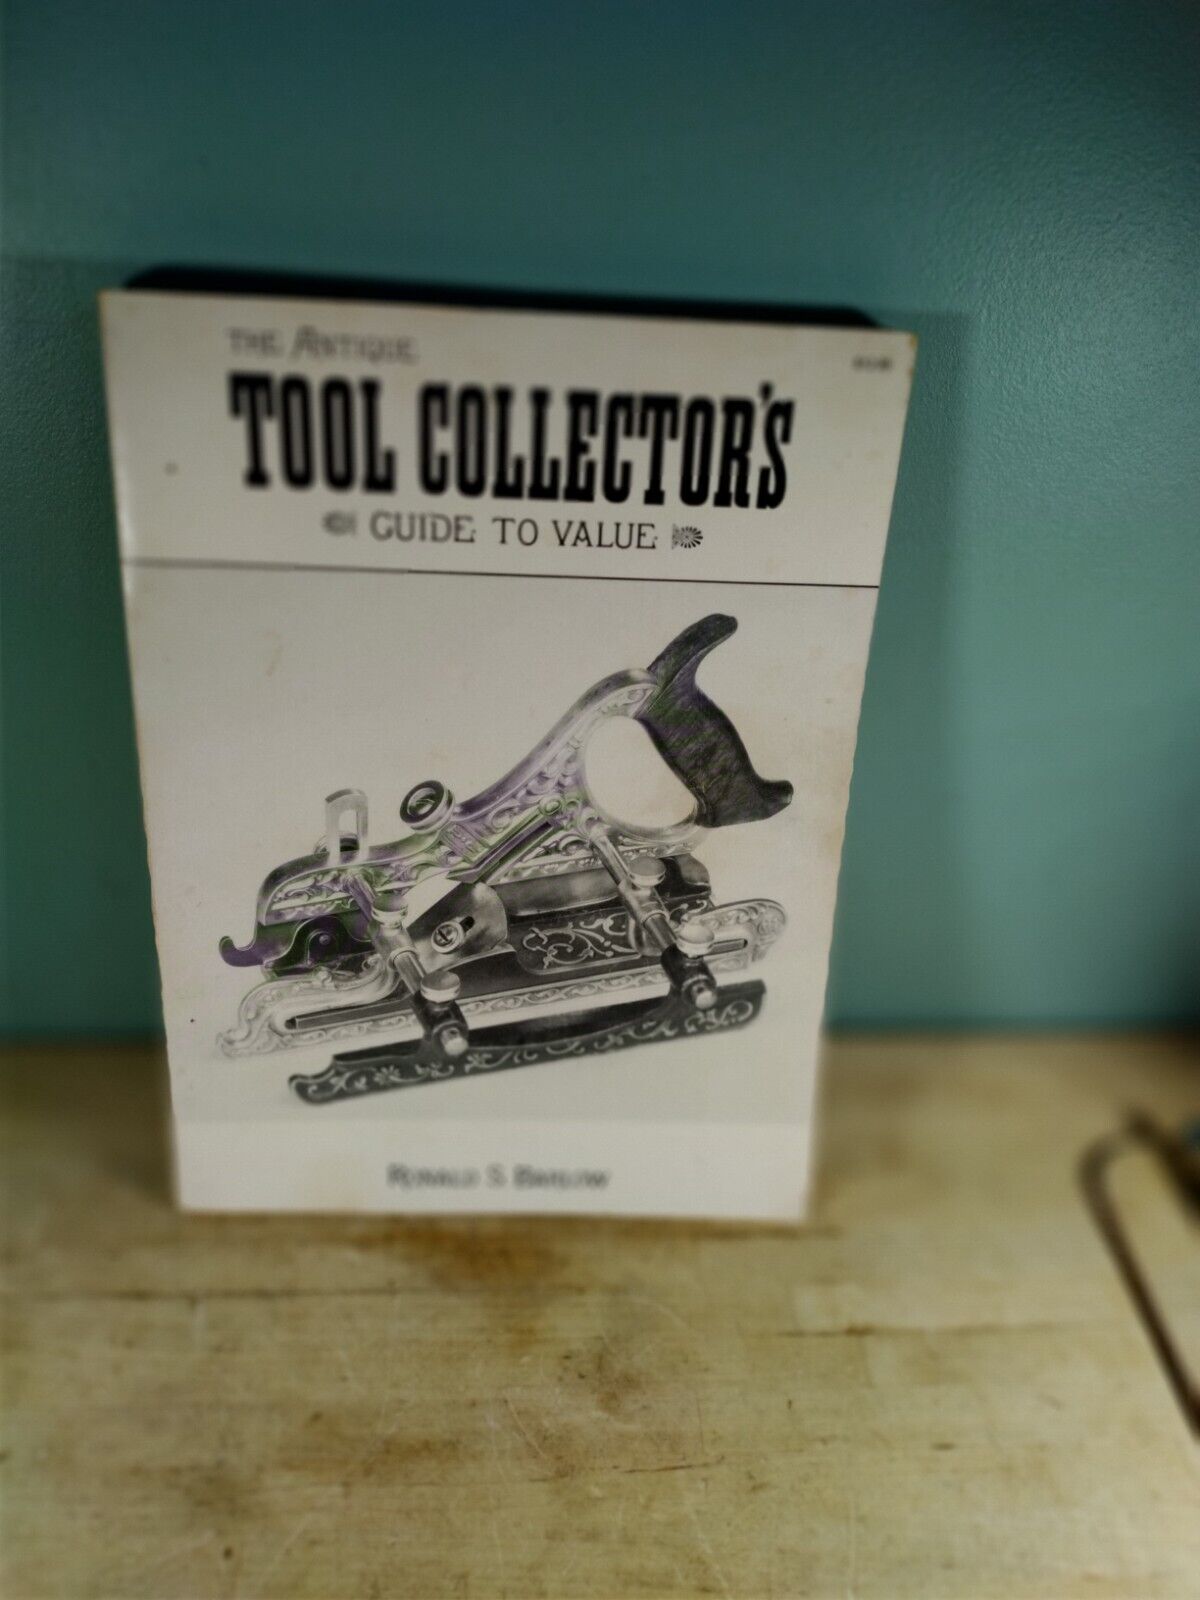 The Antique Tool Collector's Guide to Value by Ronald S. Barlow